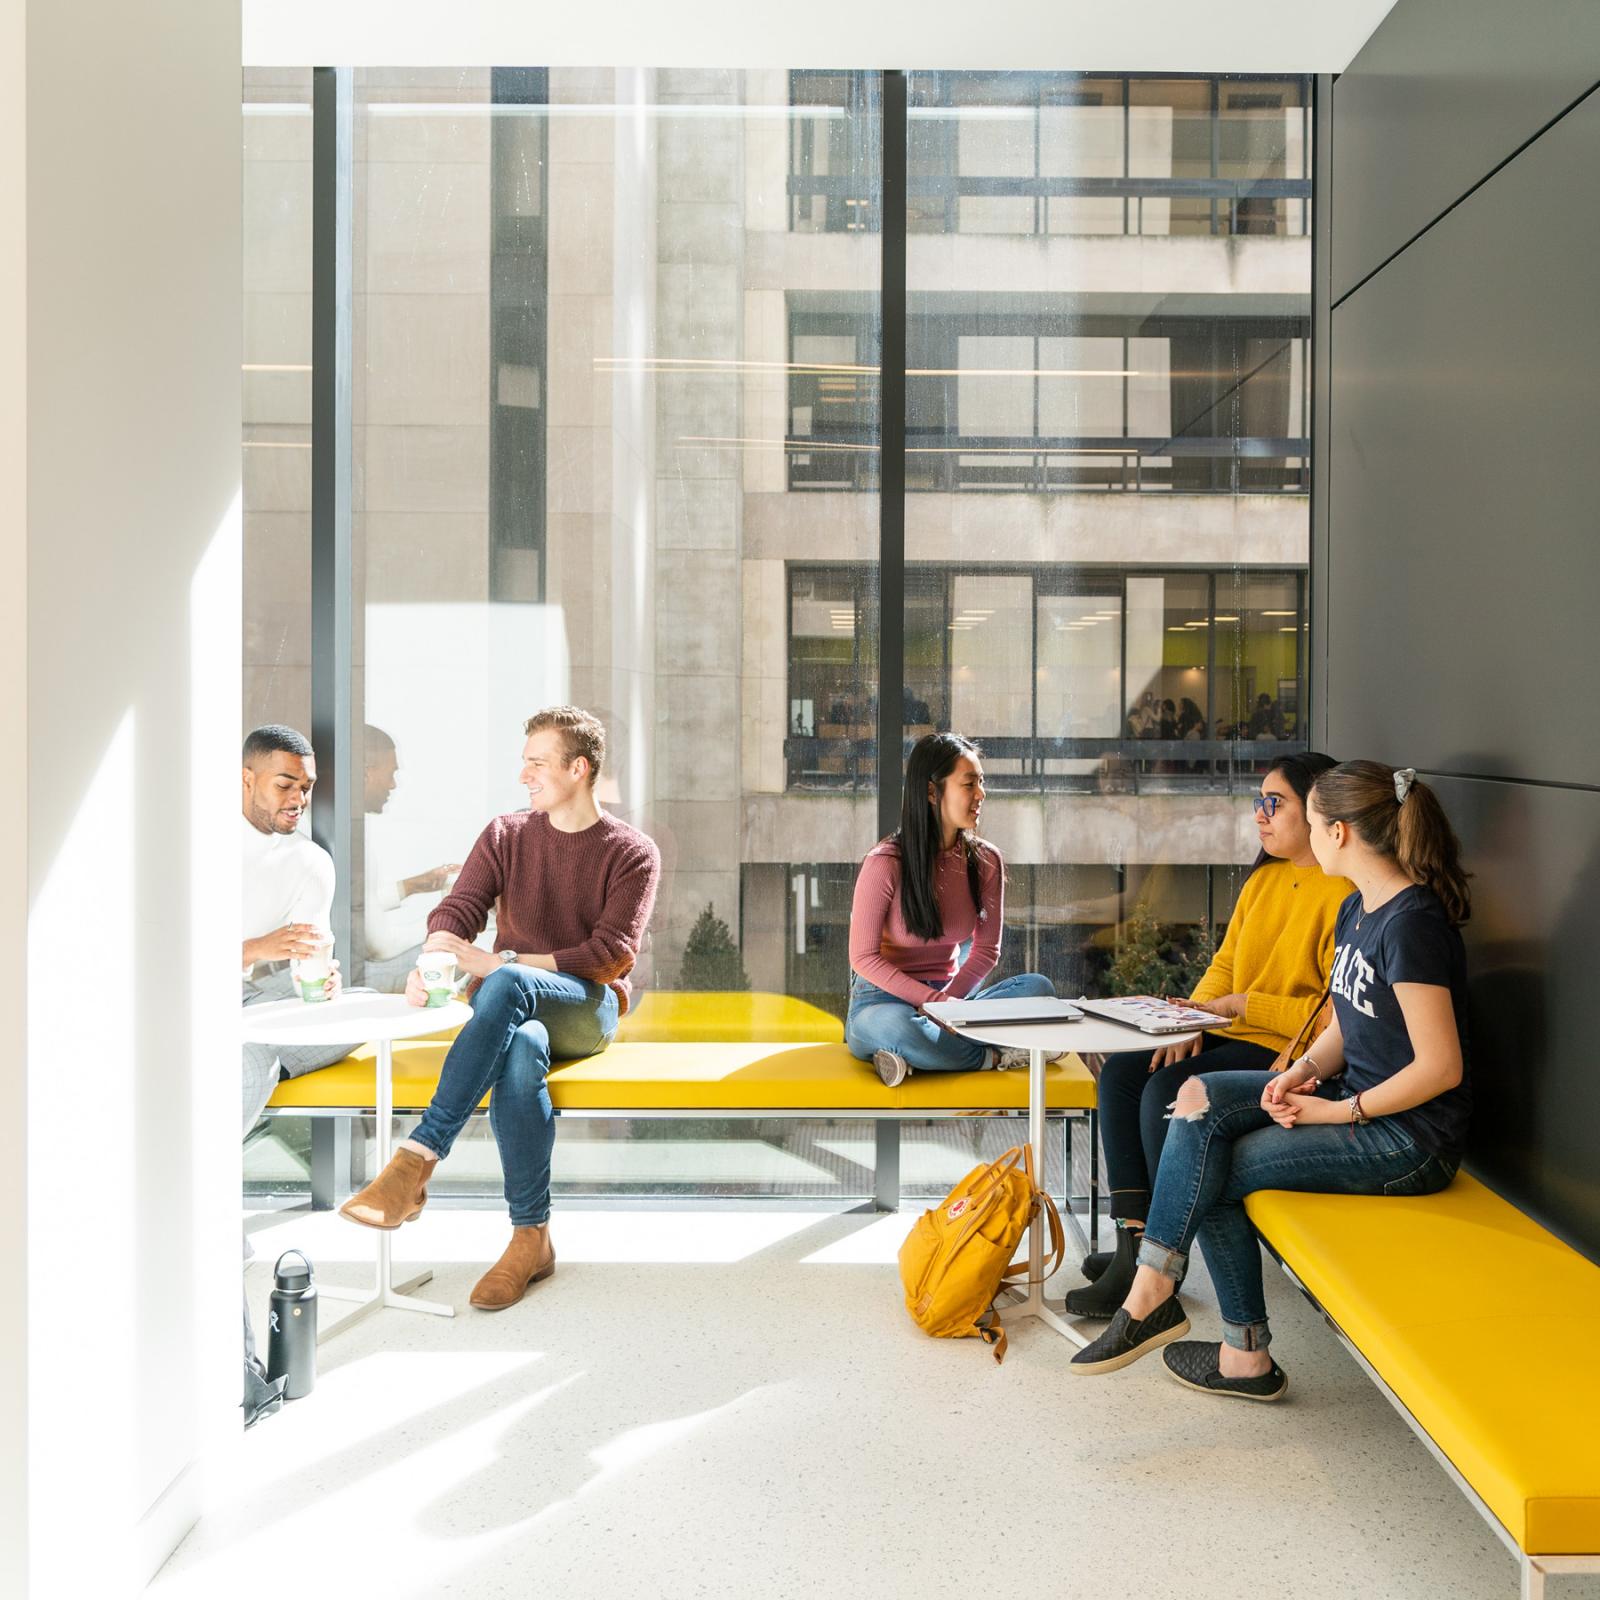 Students sitting in an open seating area at the NYC campus.